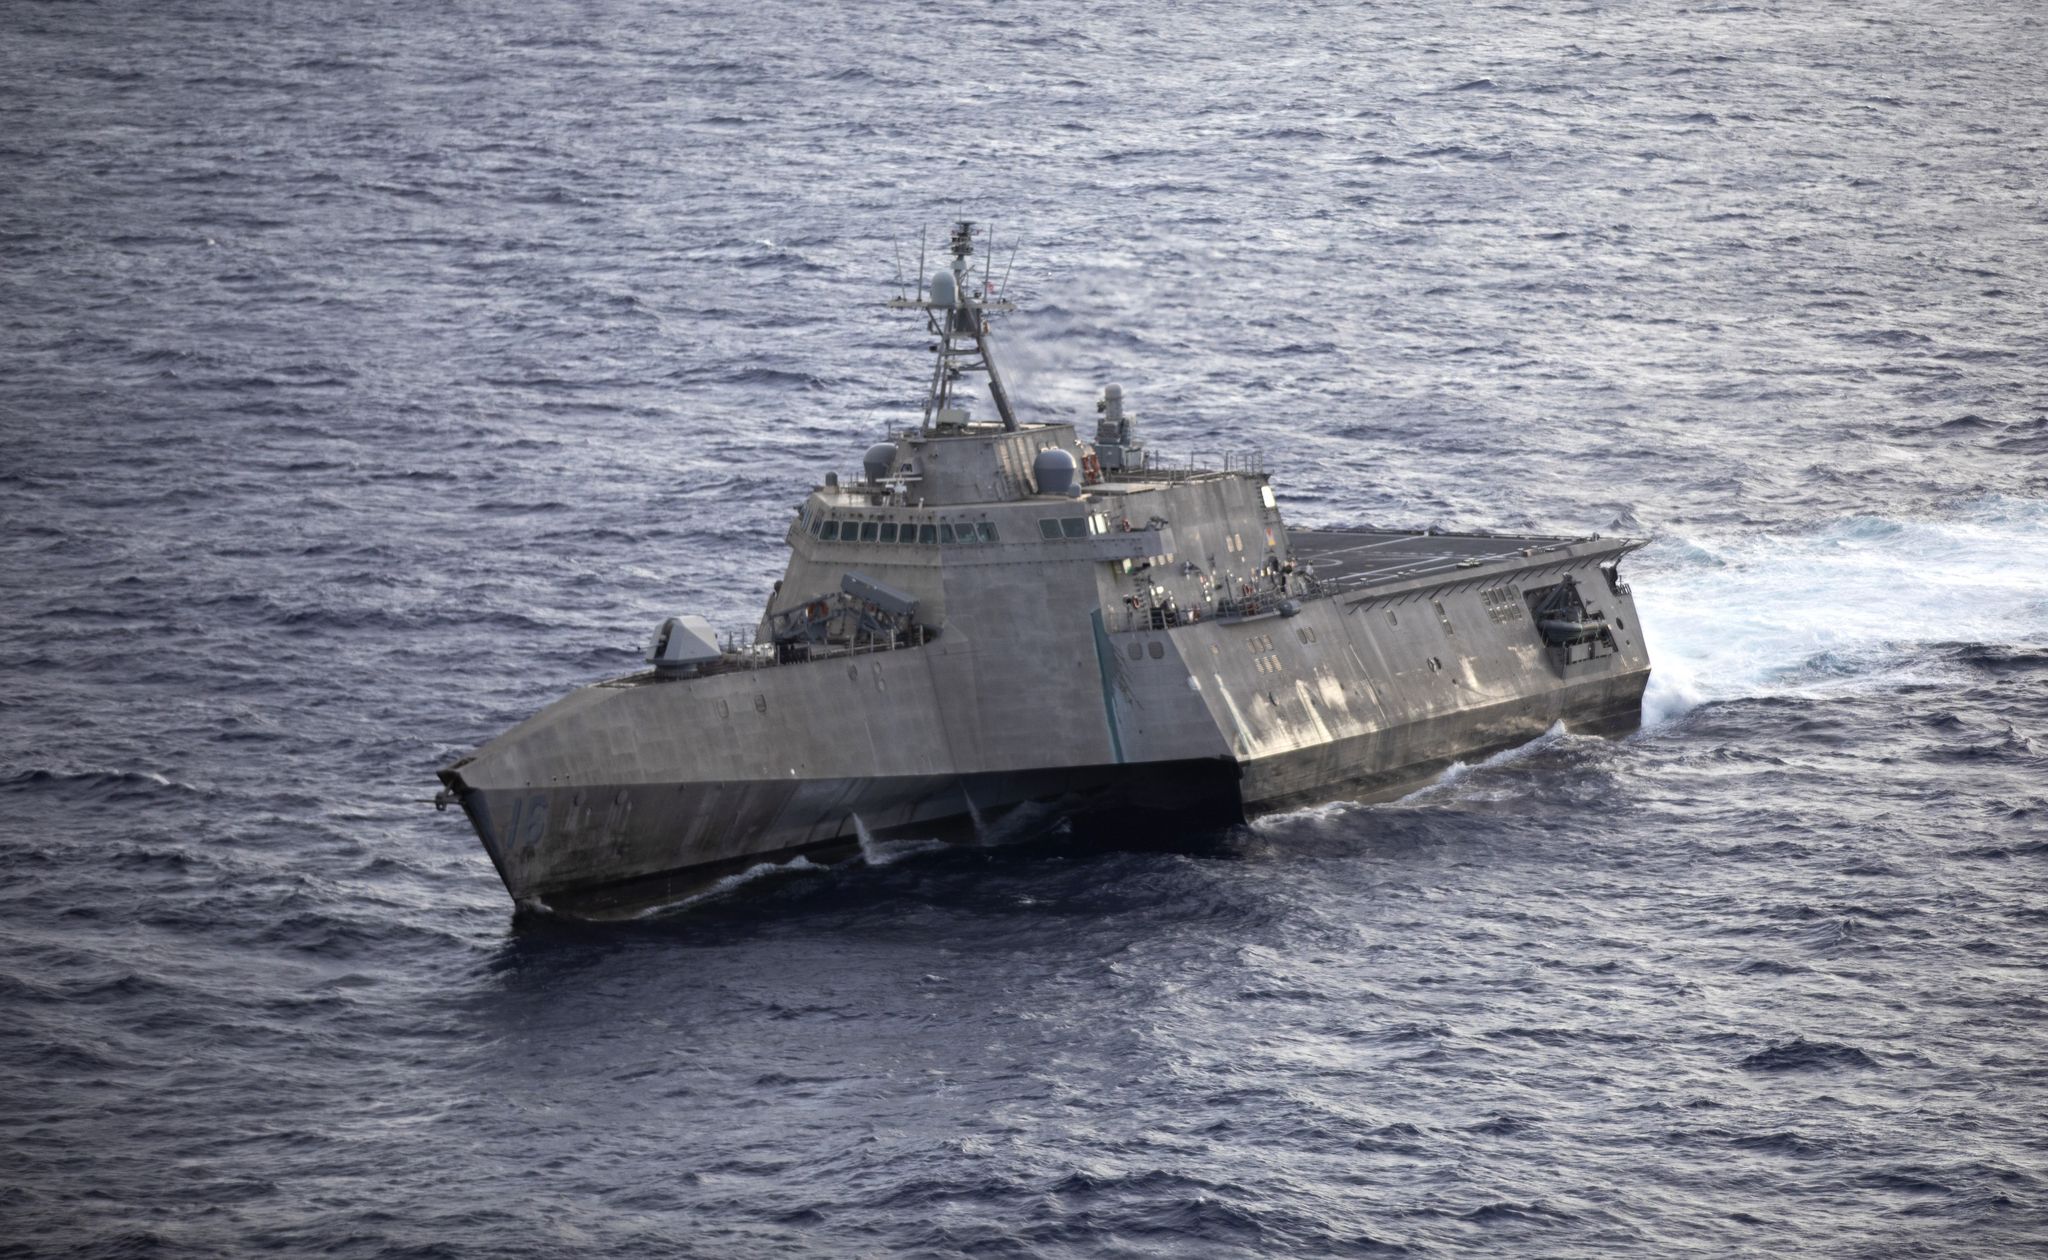 the independence variant littoral combat ship uss tulsa lcs 16 transits the philippine sea tulsa, part of destroyer squadron seven, is on a rotational deployment, operating in the us 7th fleet area of operations to enhance interoperability with partners and serve as a ready response force in support of a free and open indo pacific region us navy photo by mass communication specialist 1st class devin m langer